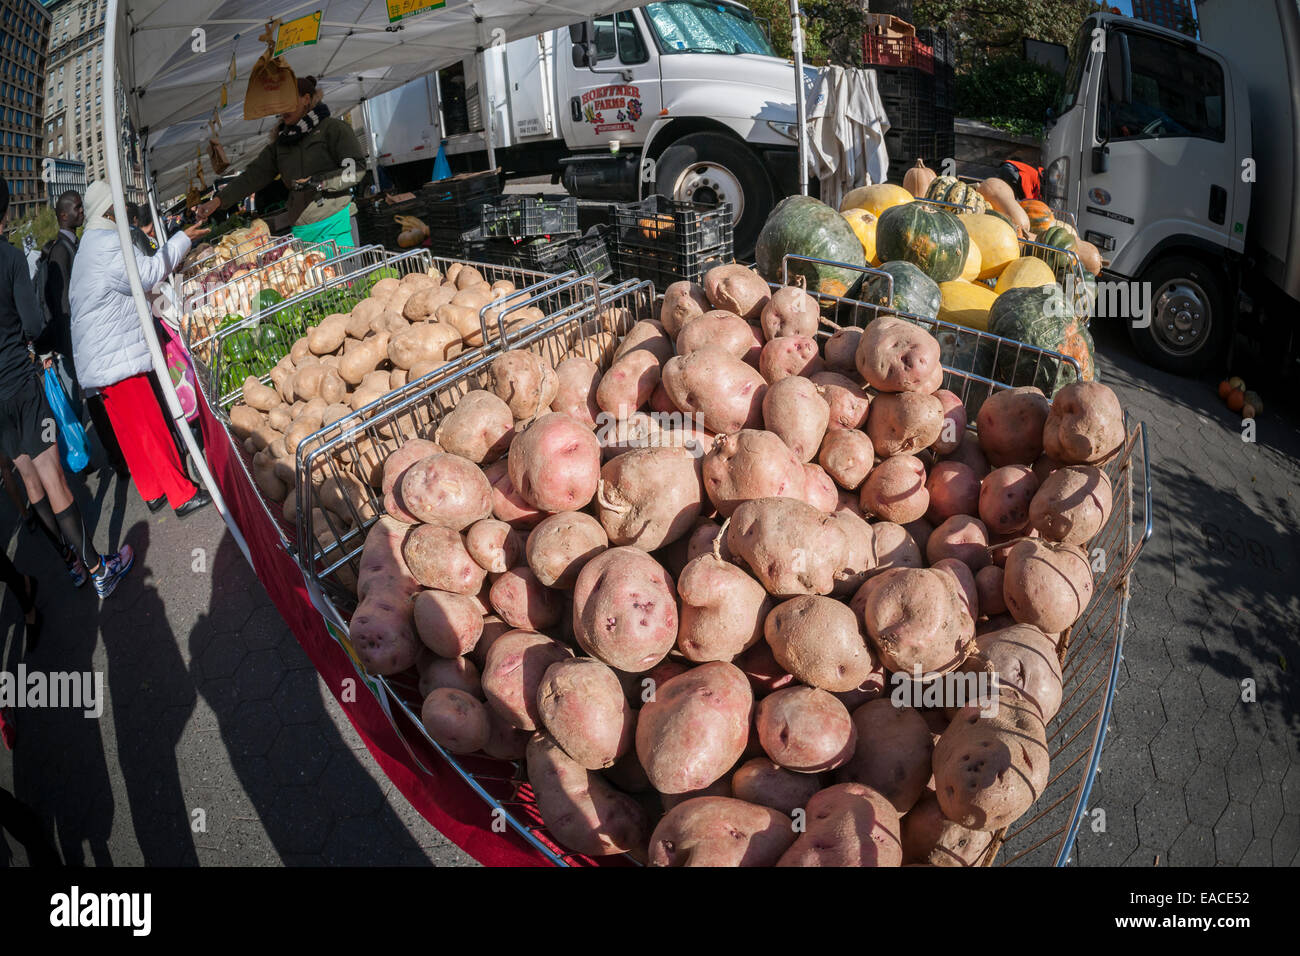 Different varieties of local non-GMO potatoes at the Union Square Greenmarket in New York Stock Photo